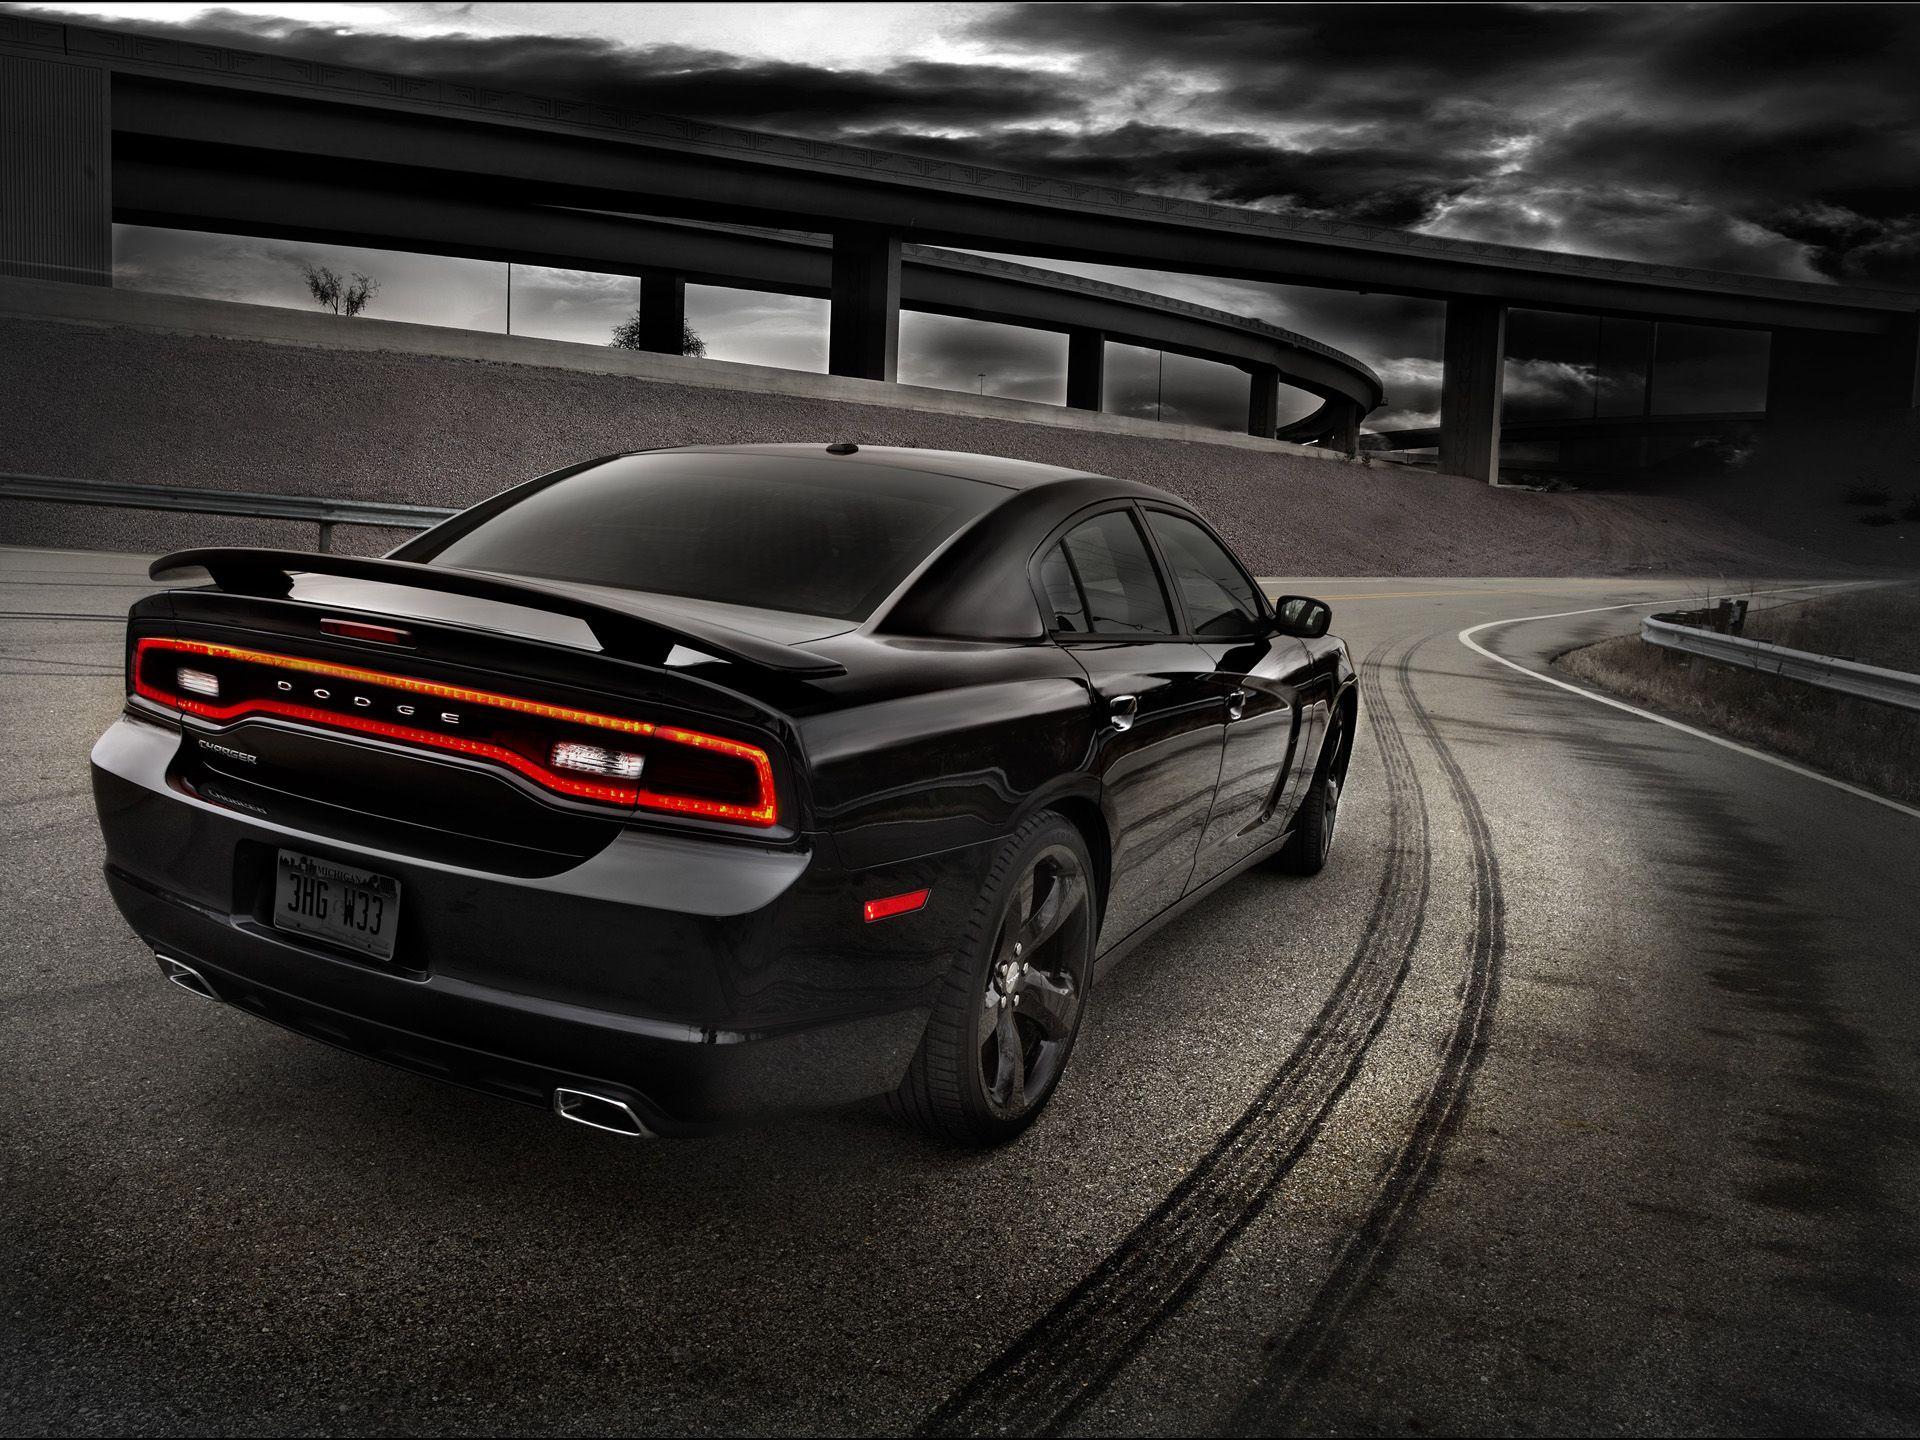 Dodge Charger Wallpaper, Wilfredo Munsell, P.9999 for mobile